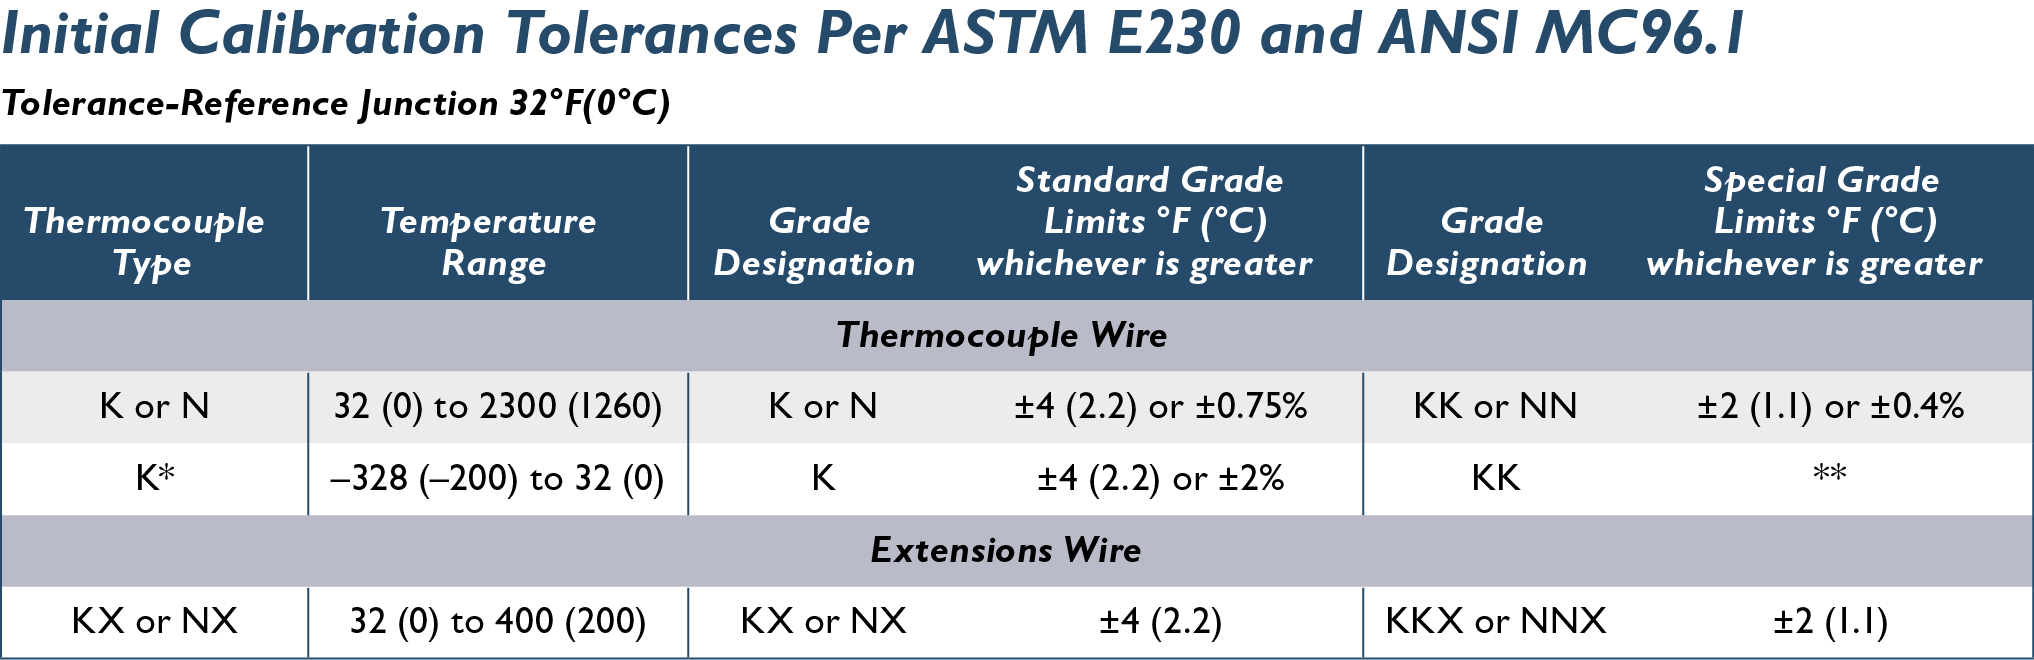 Thermocouple Wire Chemical Calibration Properties